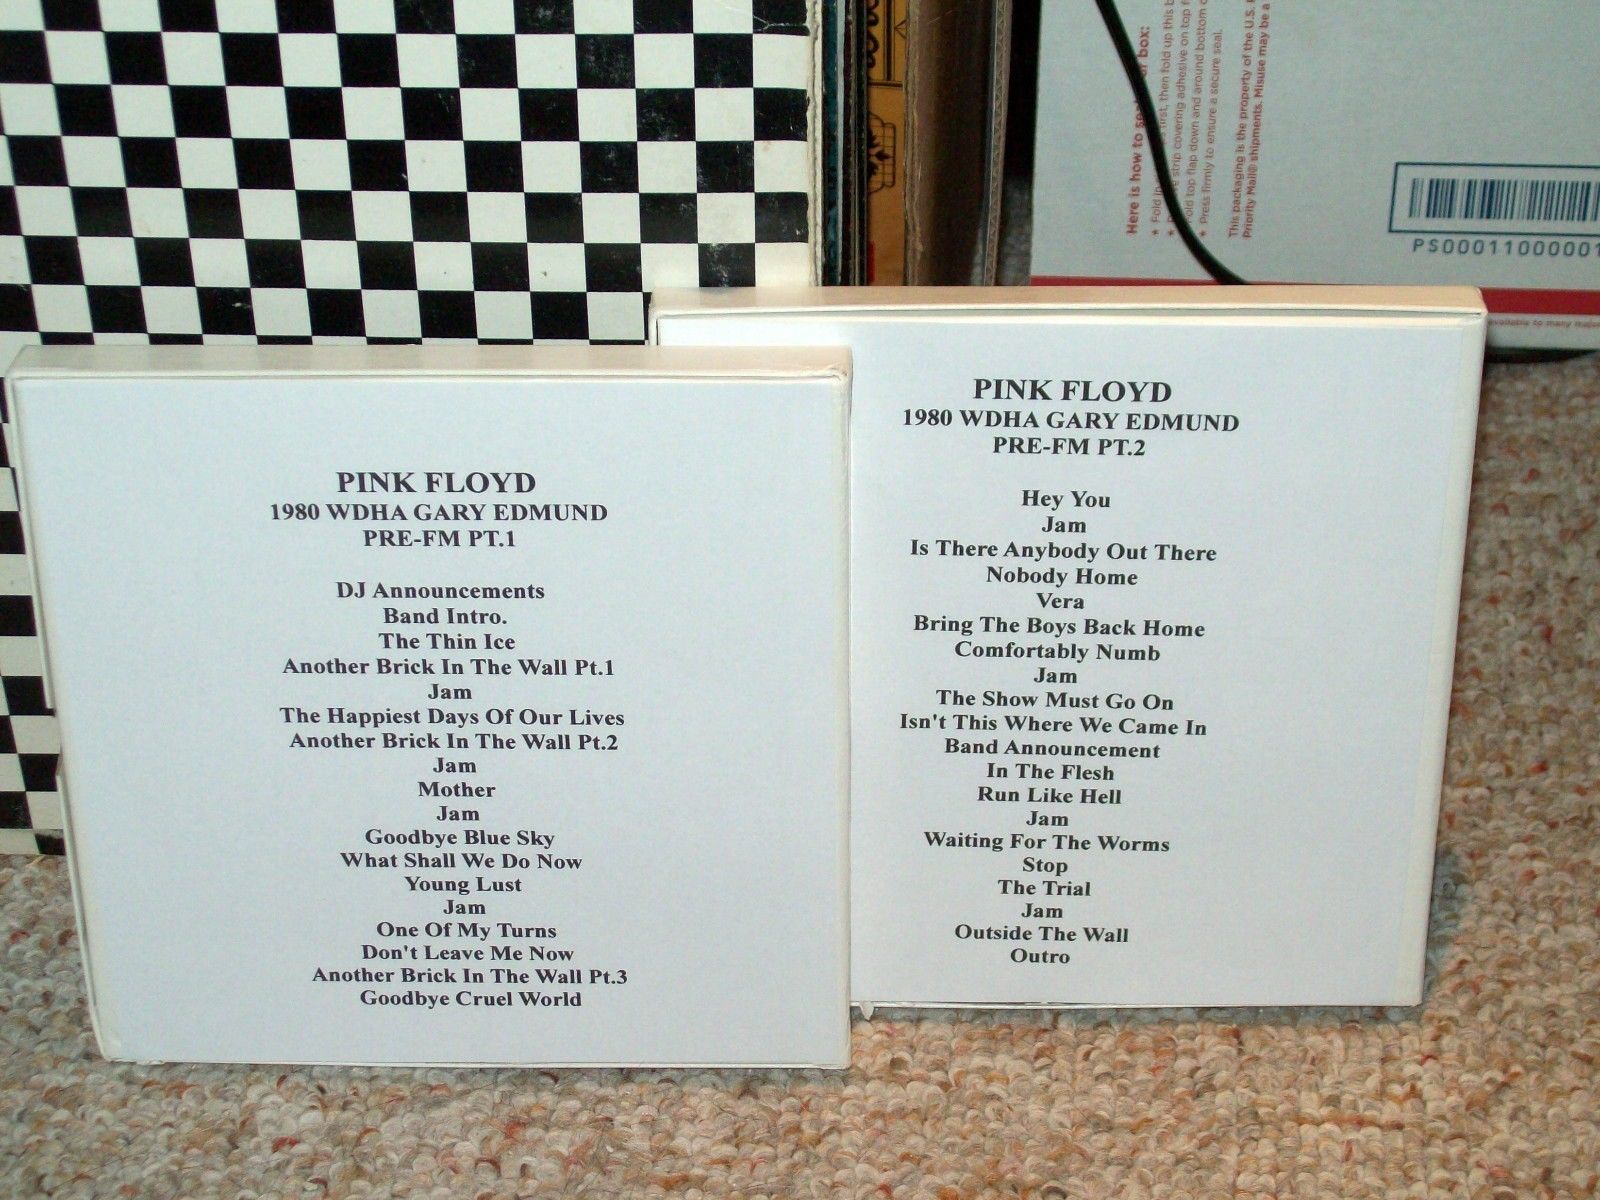  PINK FLOYD-1980 Live Wall WDHA Pre-FM Gary Edmund-EXCELLENT  REEL TO REEL TAPES - auction details